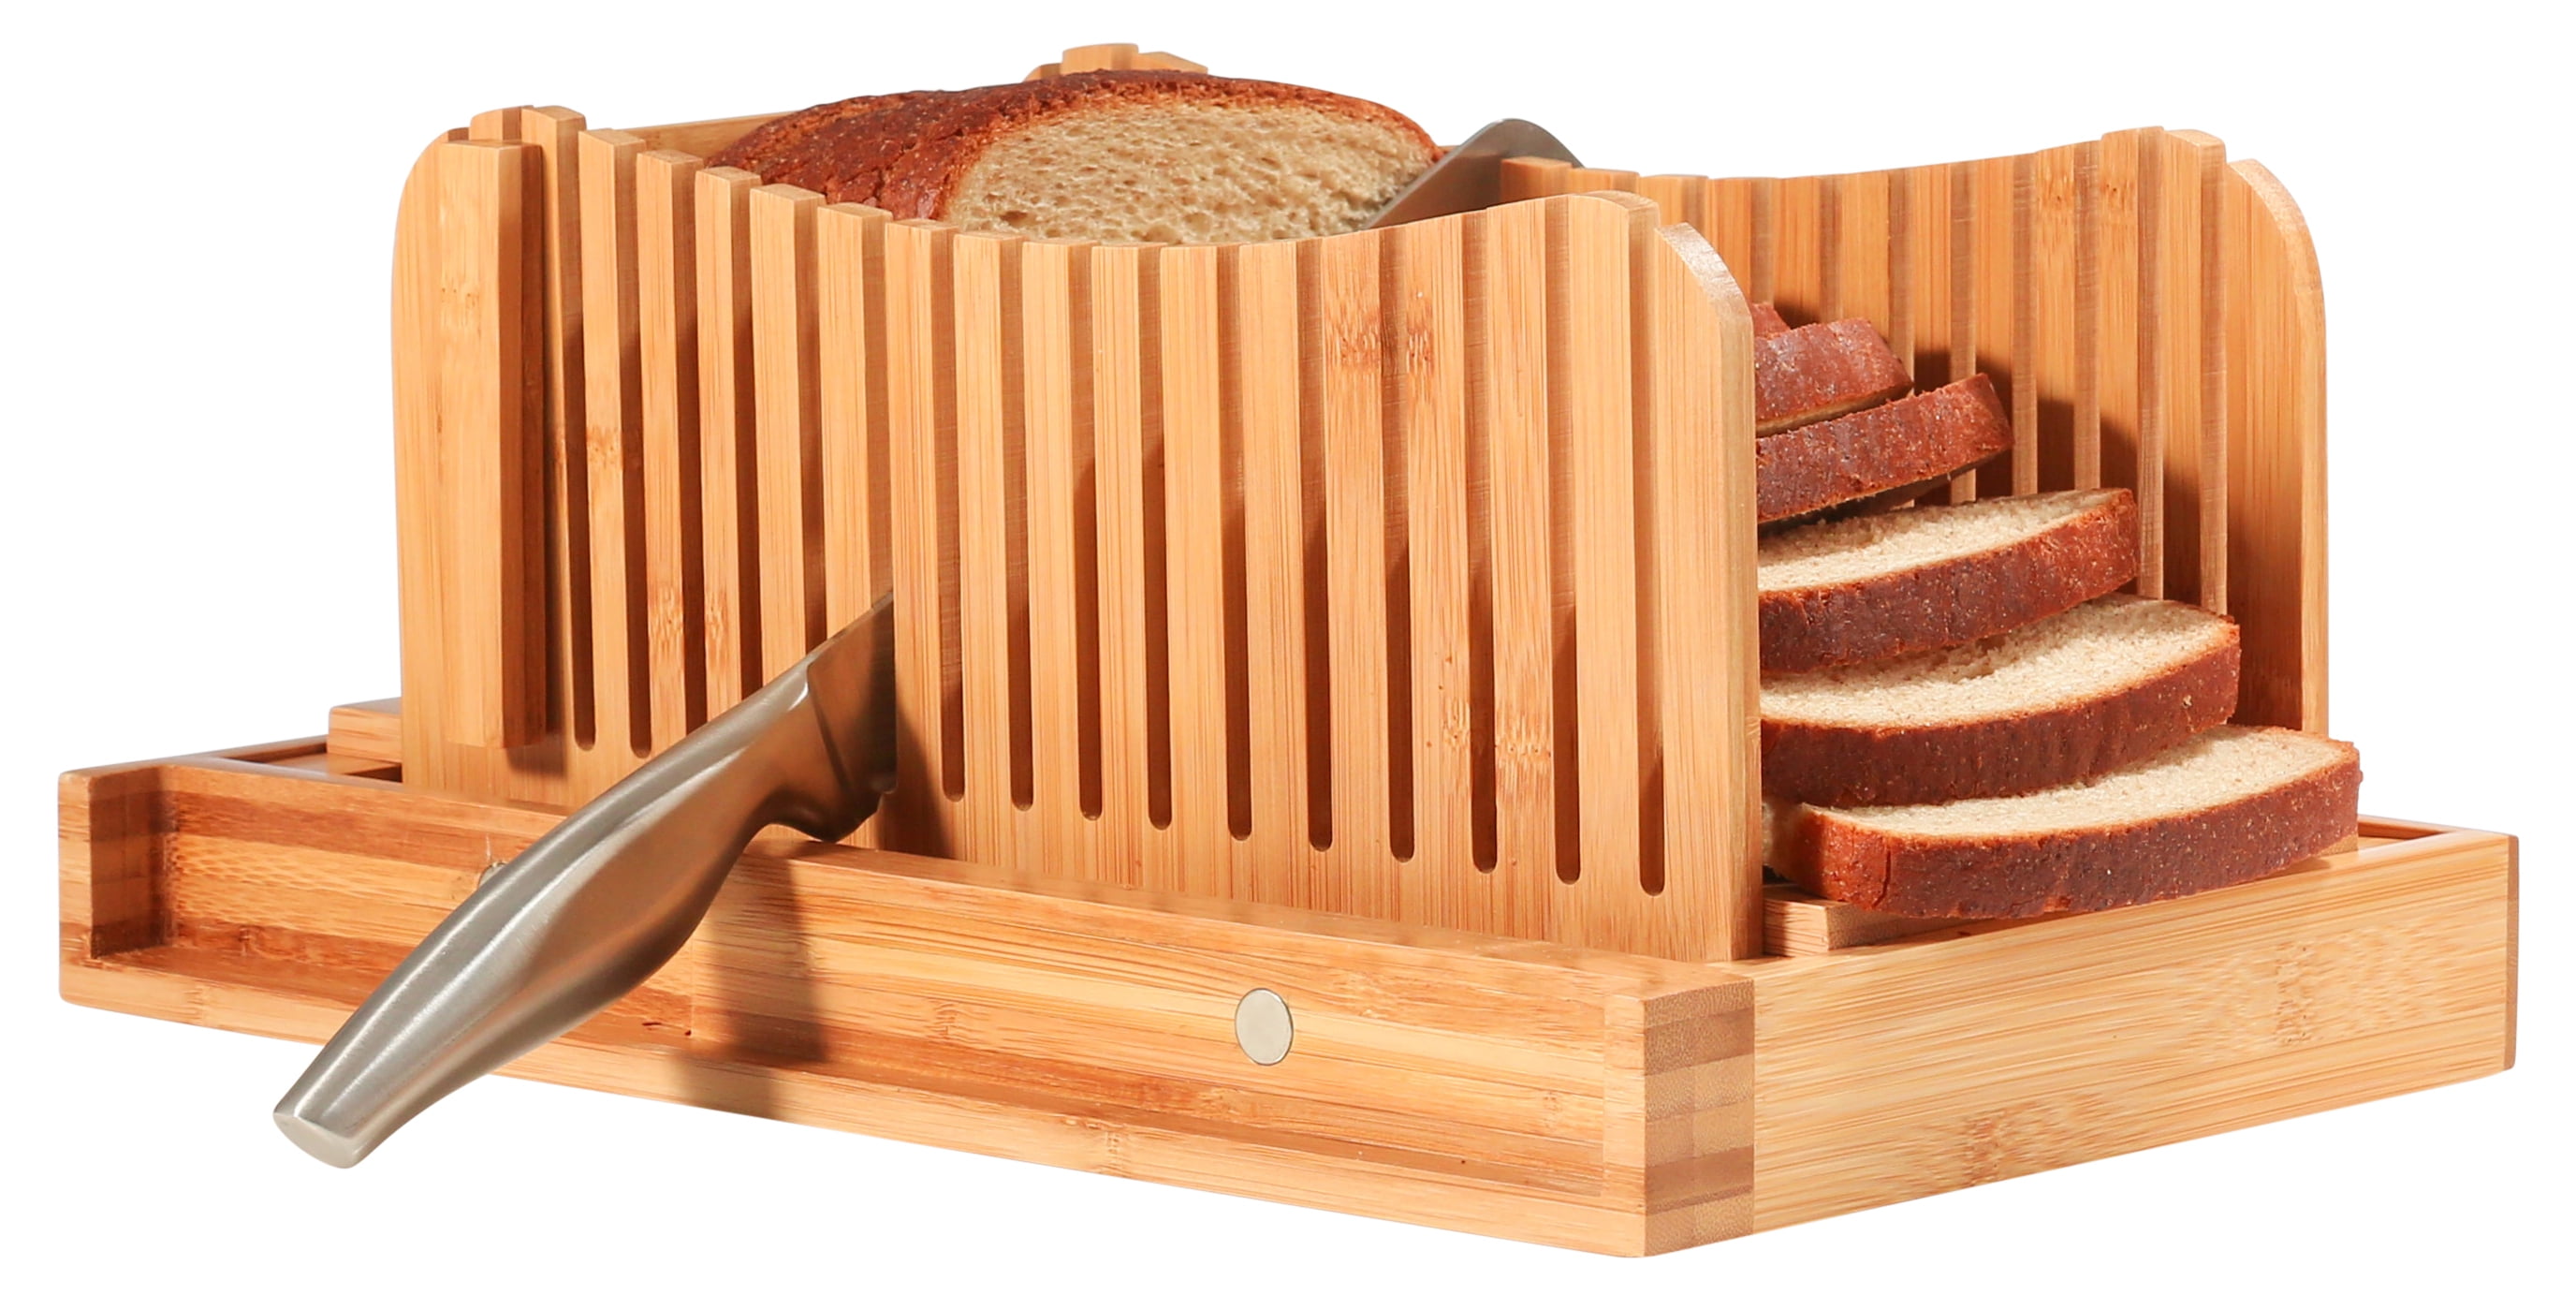 Premium Bamboo Foldable Bread Slicer – Built in Crumb Catcher and